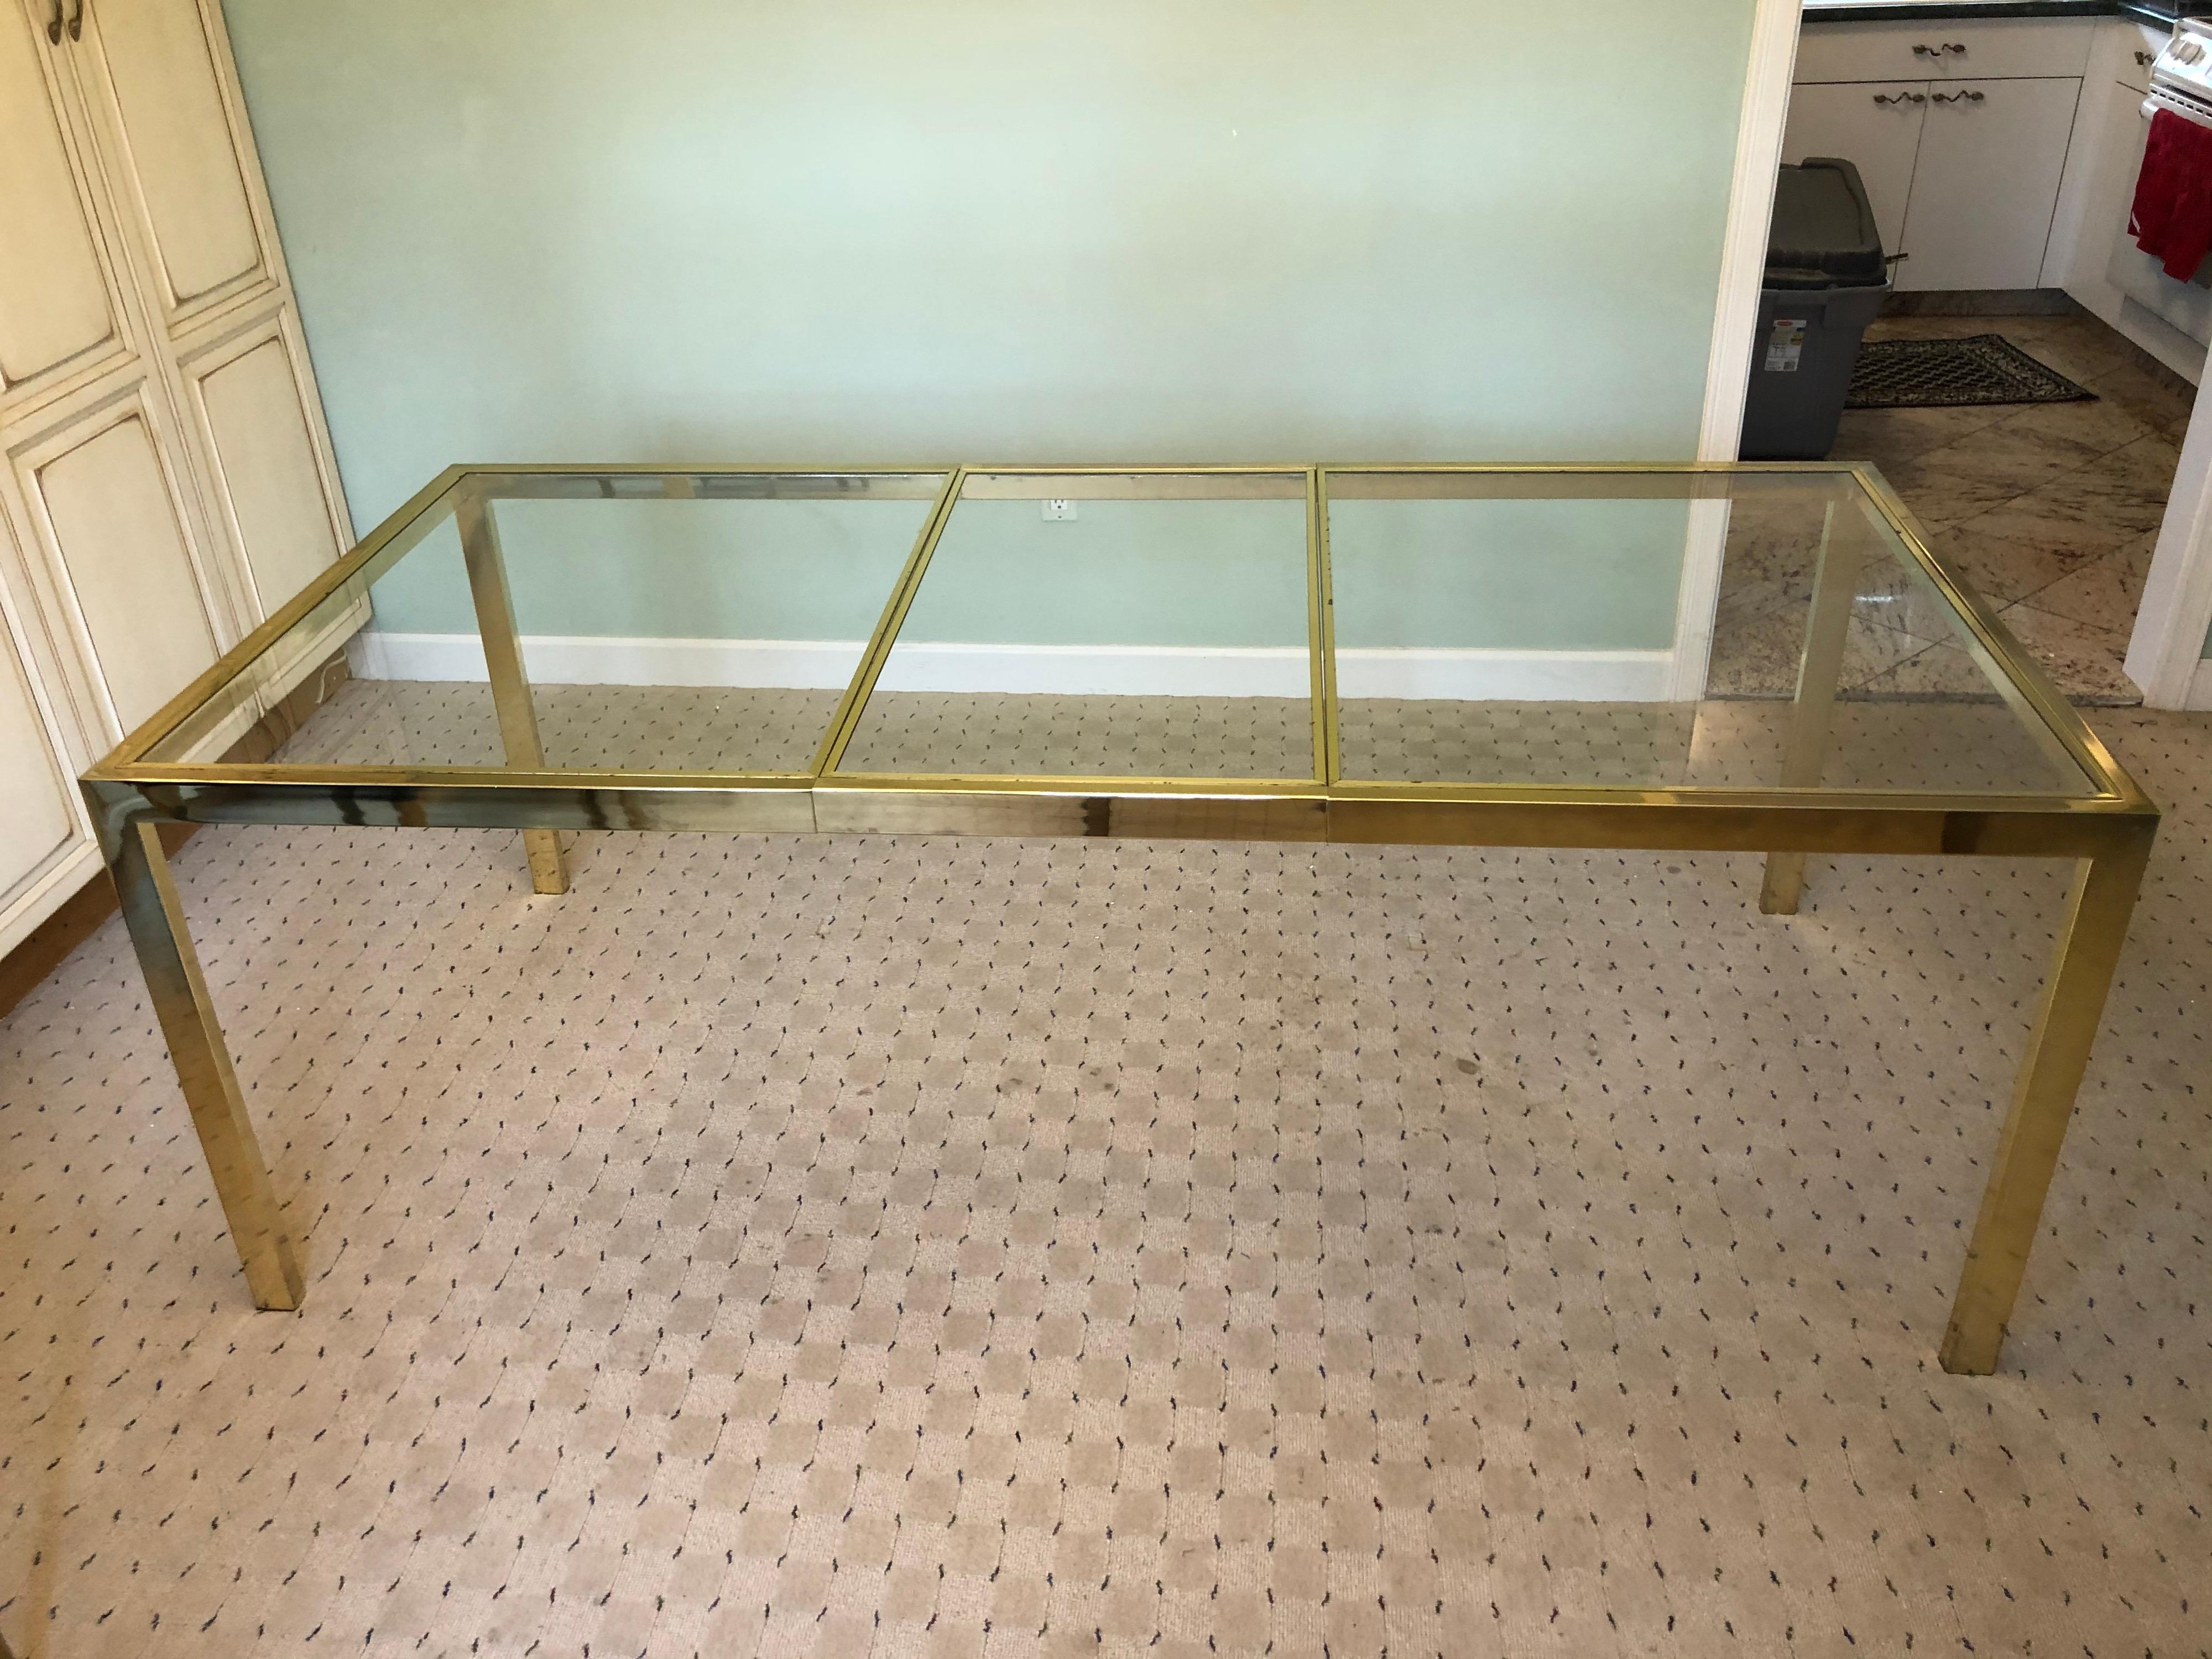 Milo Baughman style adjustable brass dining table.
The glass top separates into three glass panels that lift out and the table then can shrink to be smaller on its own track.